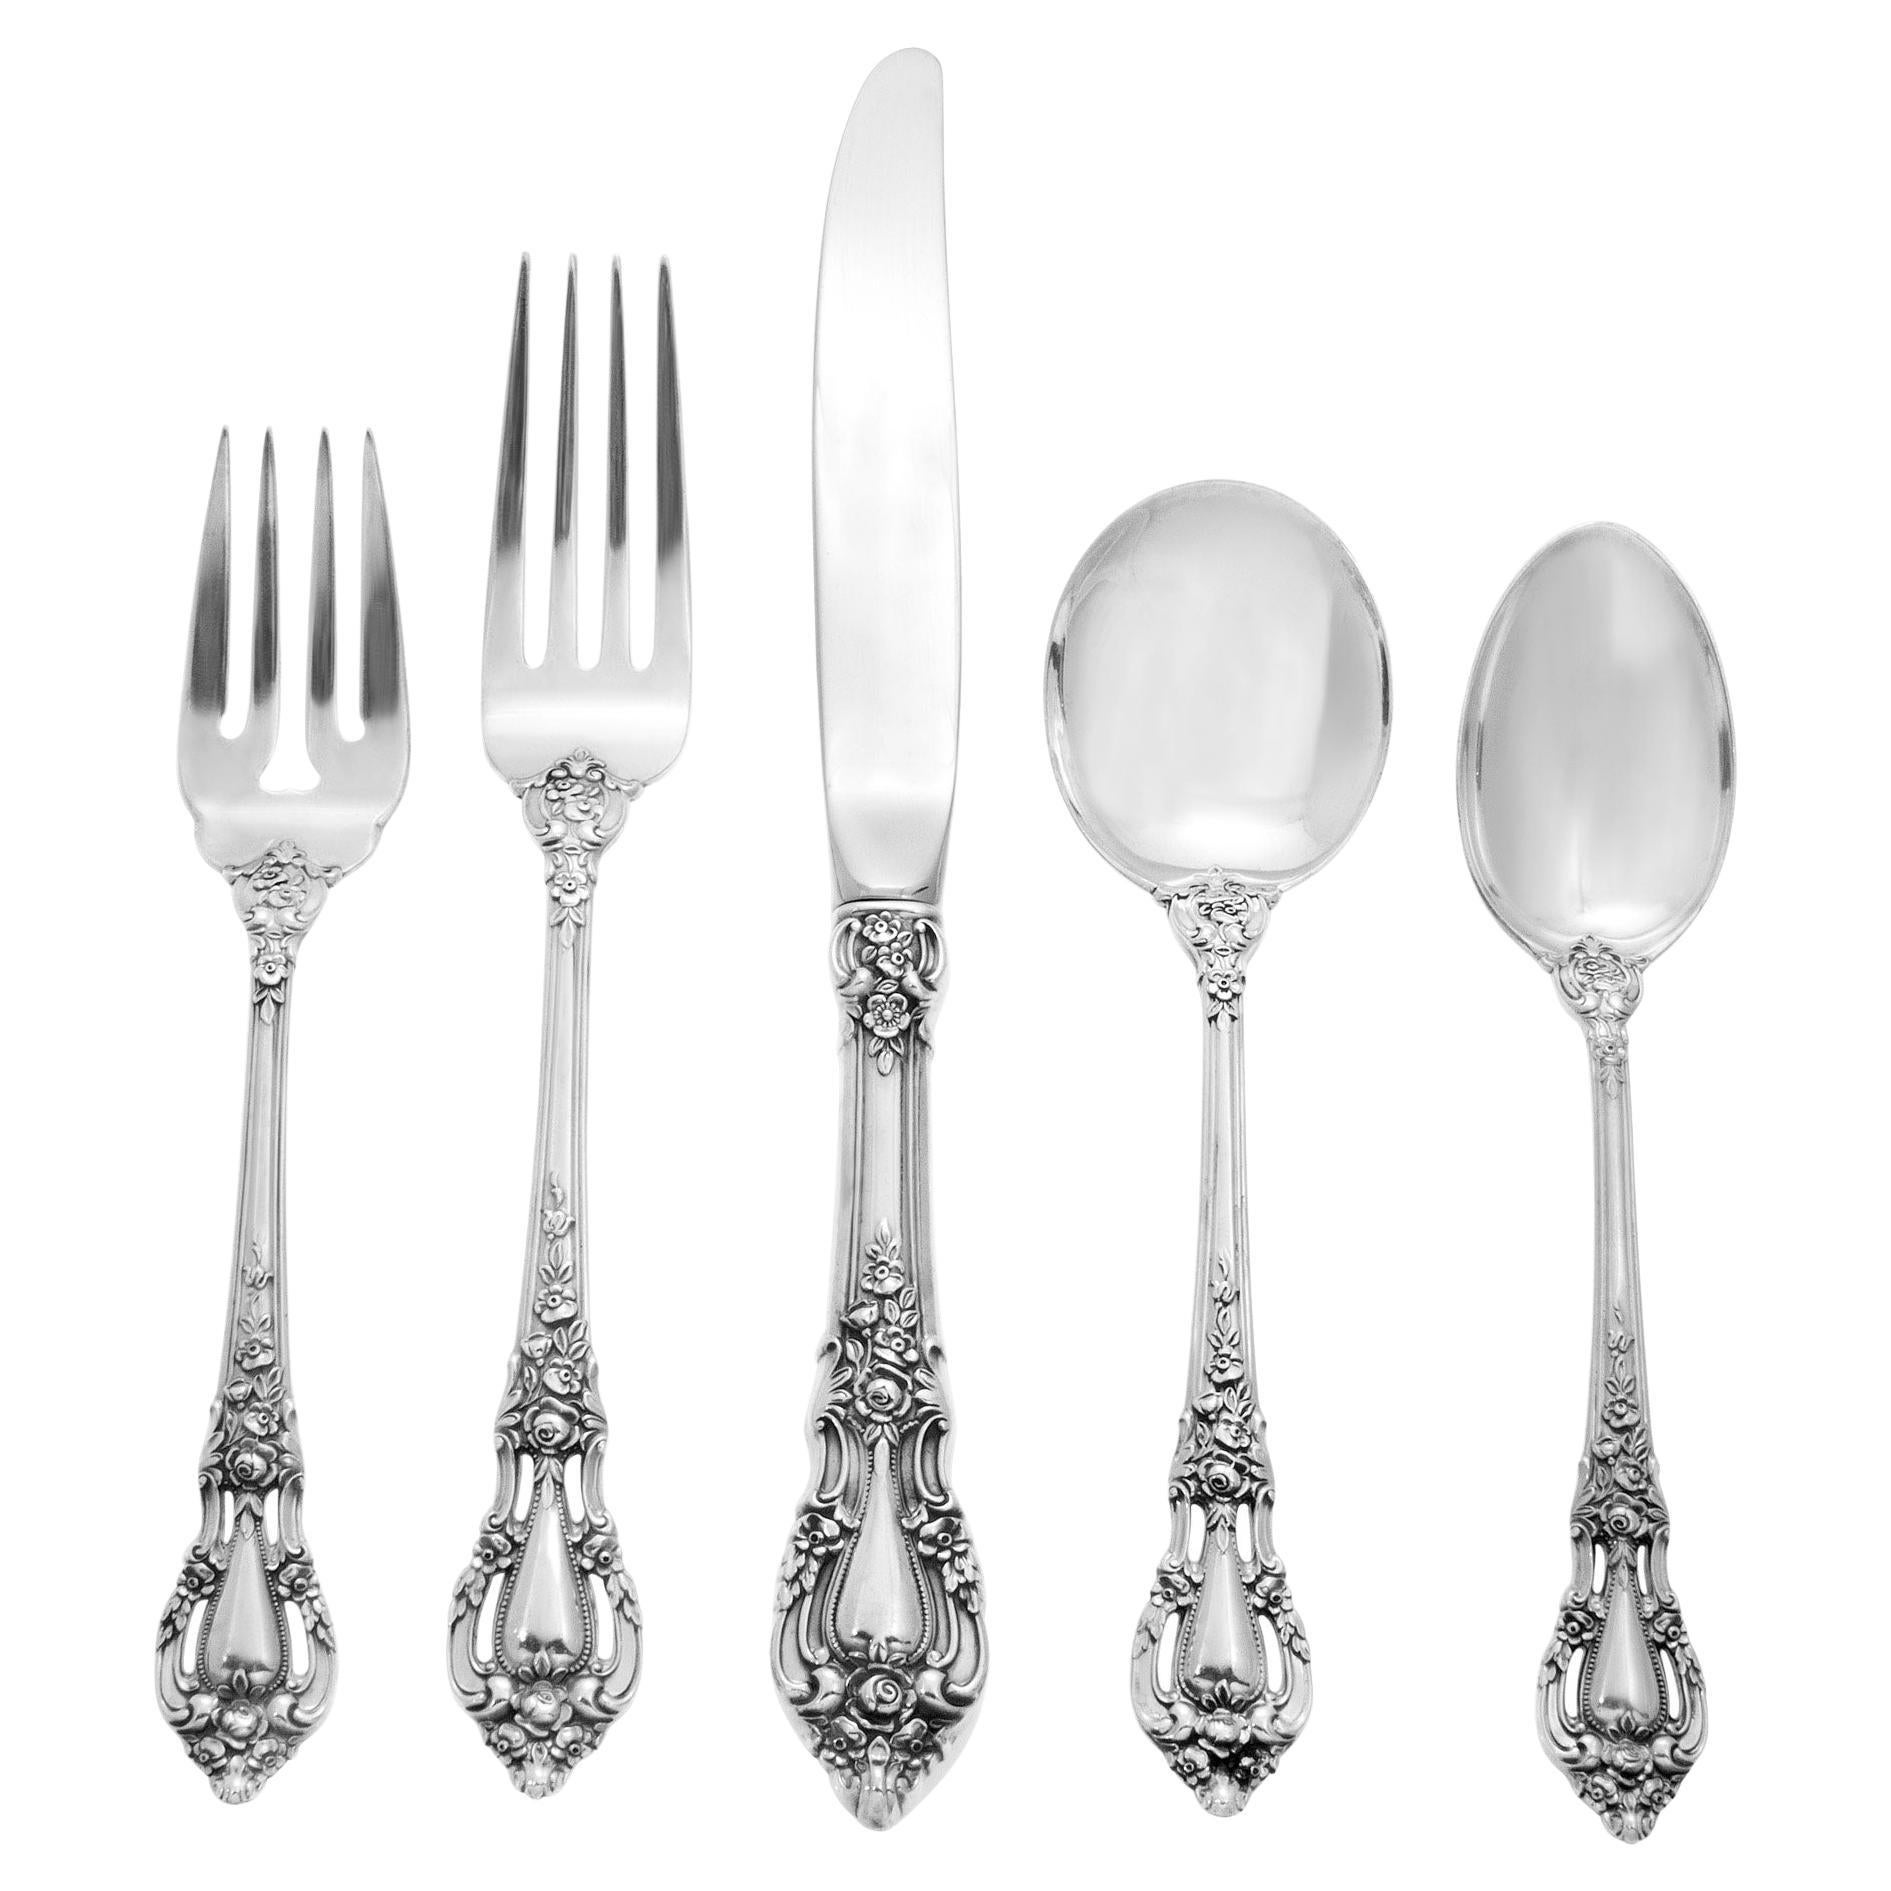 Memory Lane By Lunt Sterling Silver Flatware Set 8 Place Setting For